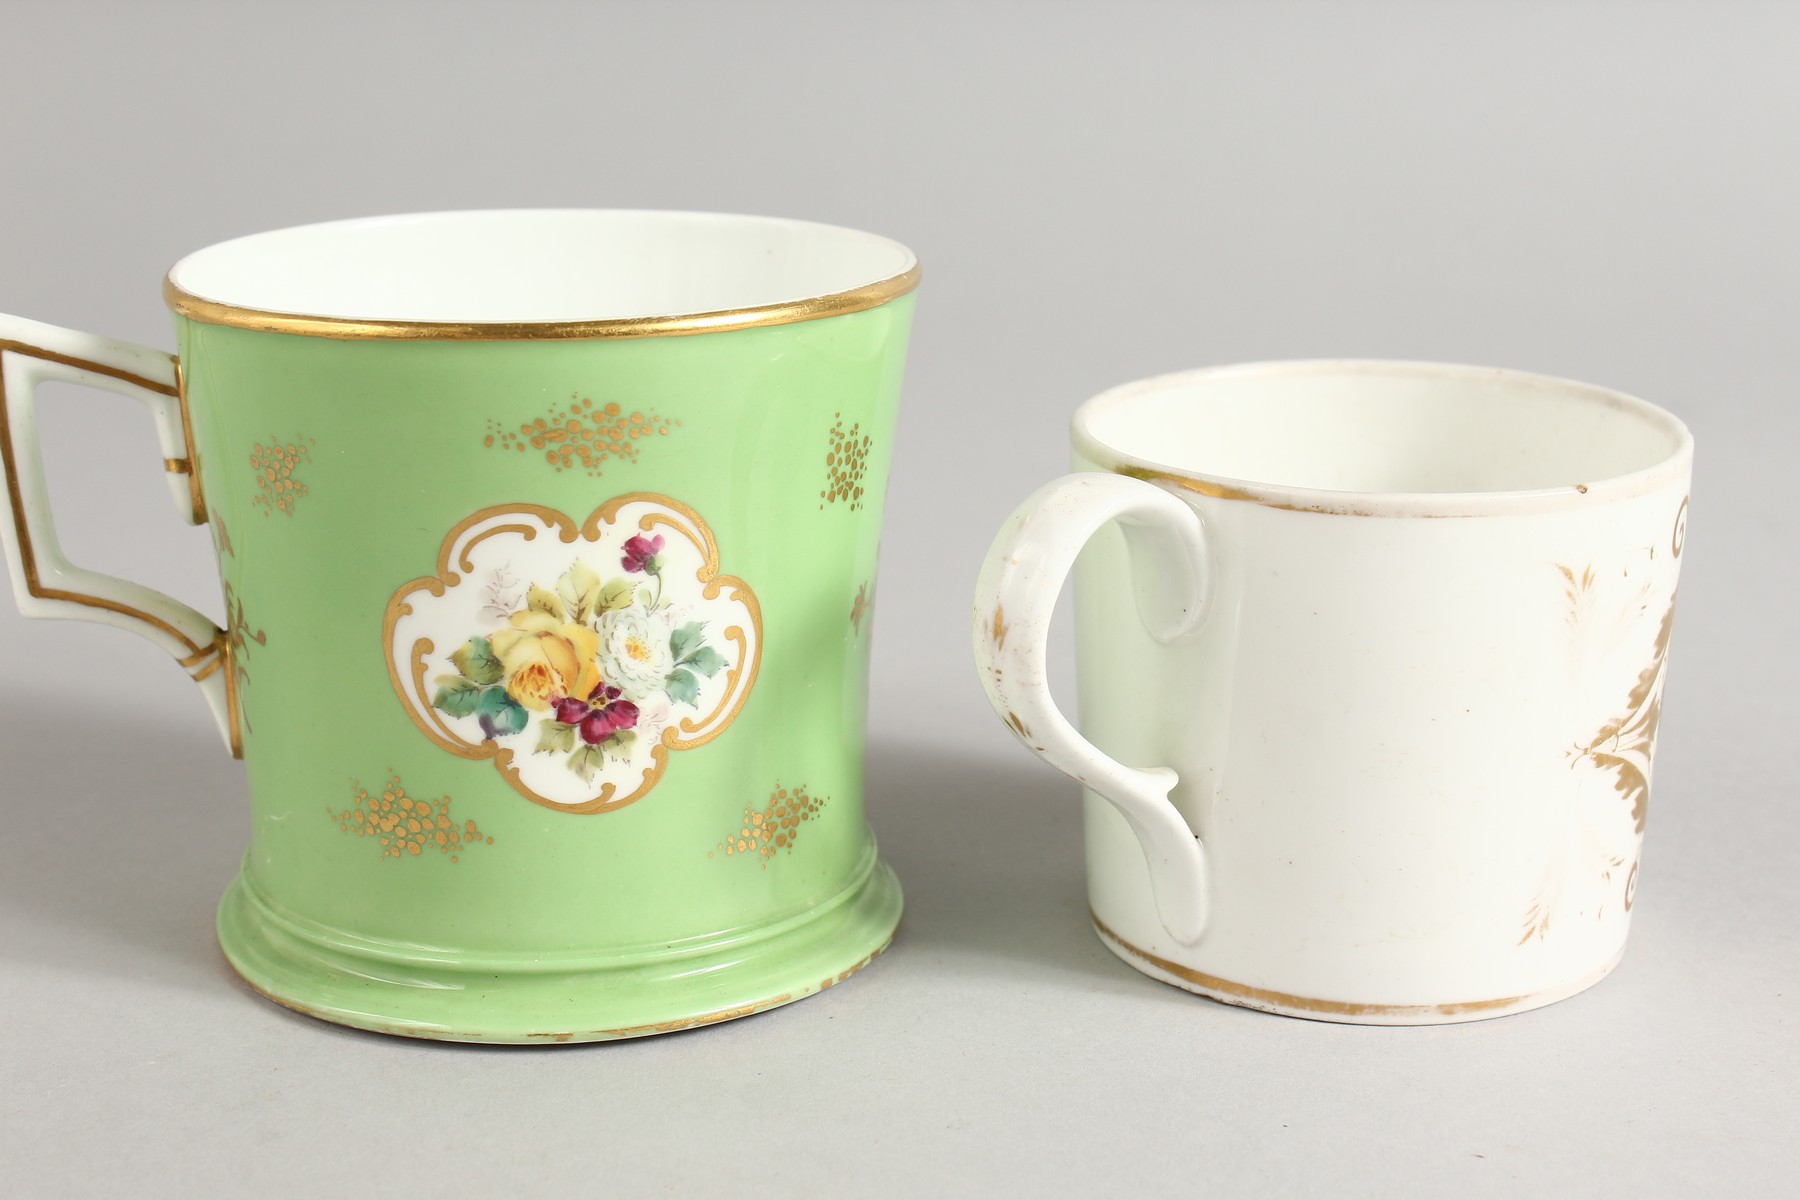 A LATE 19TH CENTURY ROYAL CROWN DERBY MUG painted with flowers on a green ground and a Derby small - Image 2 of 5